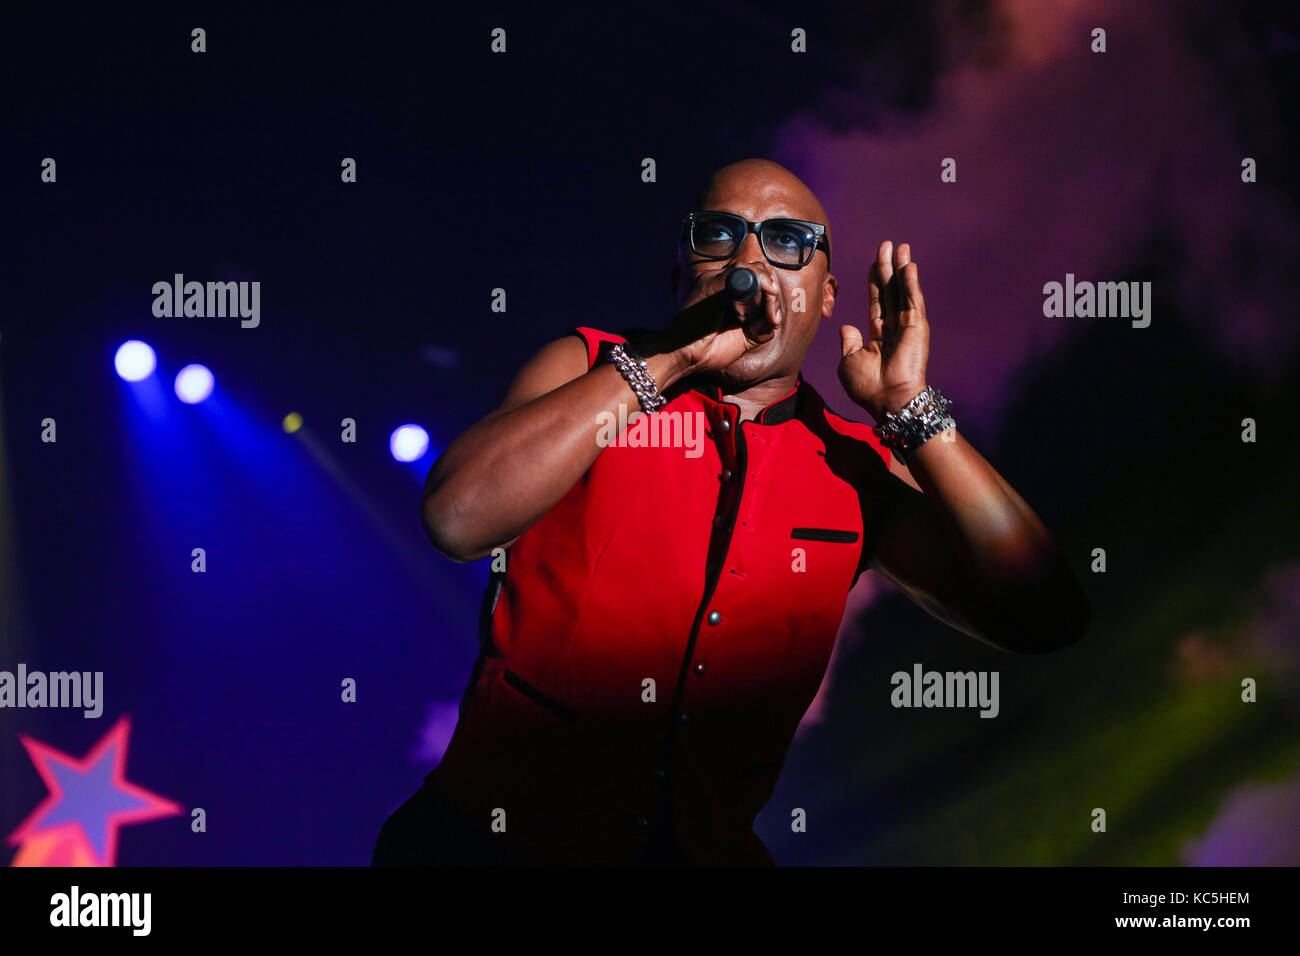 Haddaway (civil name Alexander Nestor Haddaway), Trinidadian-German singer performs his 90s Eurodance hit 'What is love' at 90er Party Arena Wetzlar (party with mainly Eurodance-stars from the 90s), Rittal-Arena, Wetzlar, Germany, 30th September, 2017. Credit: Christian Lademann Stock Photo